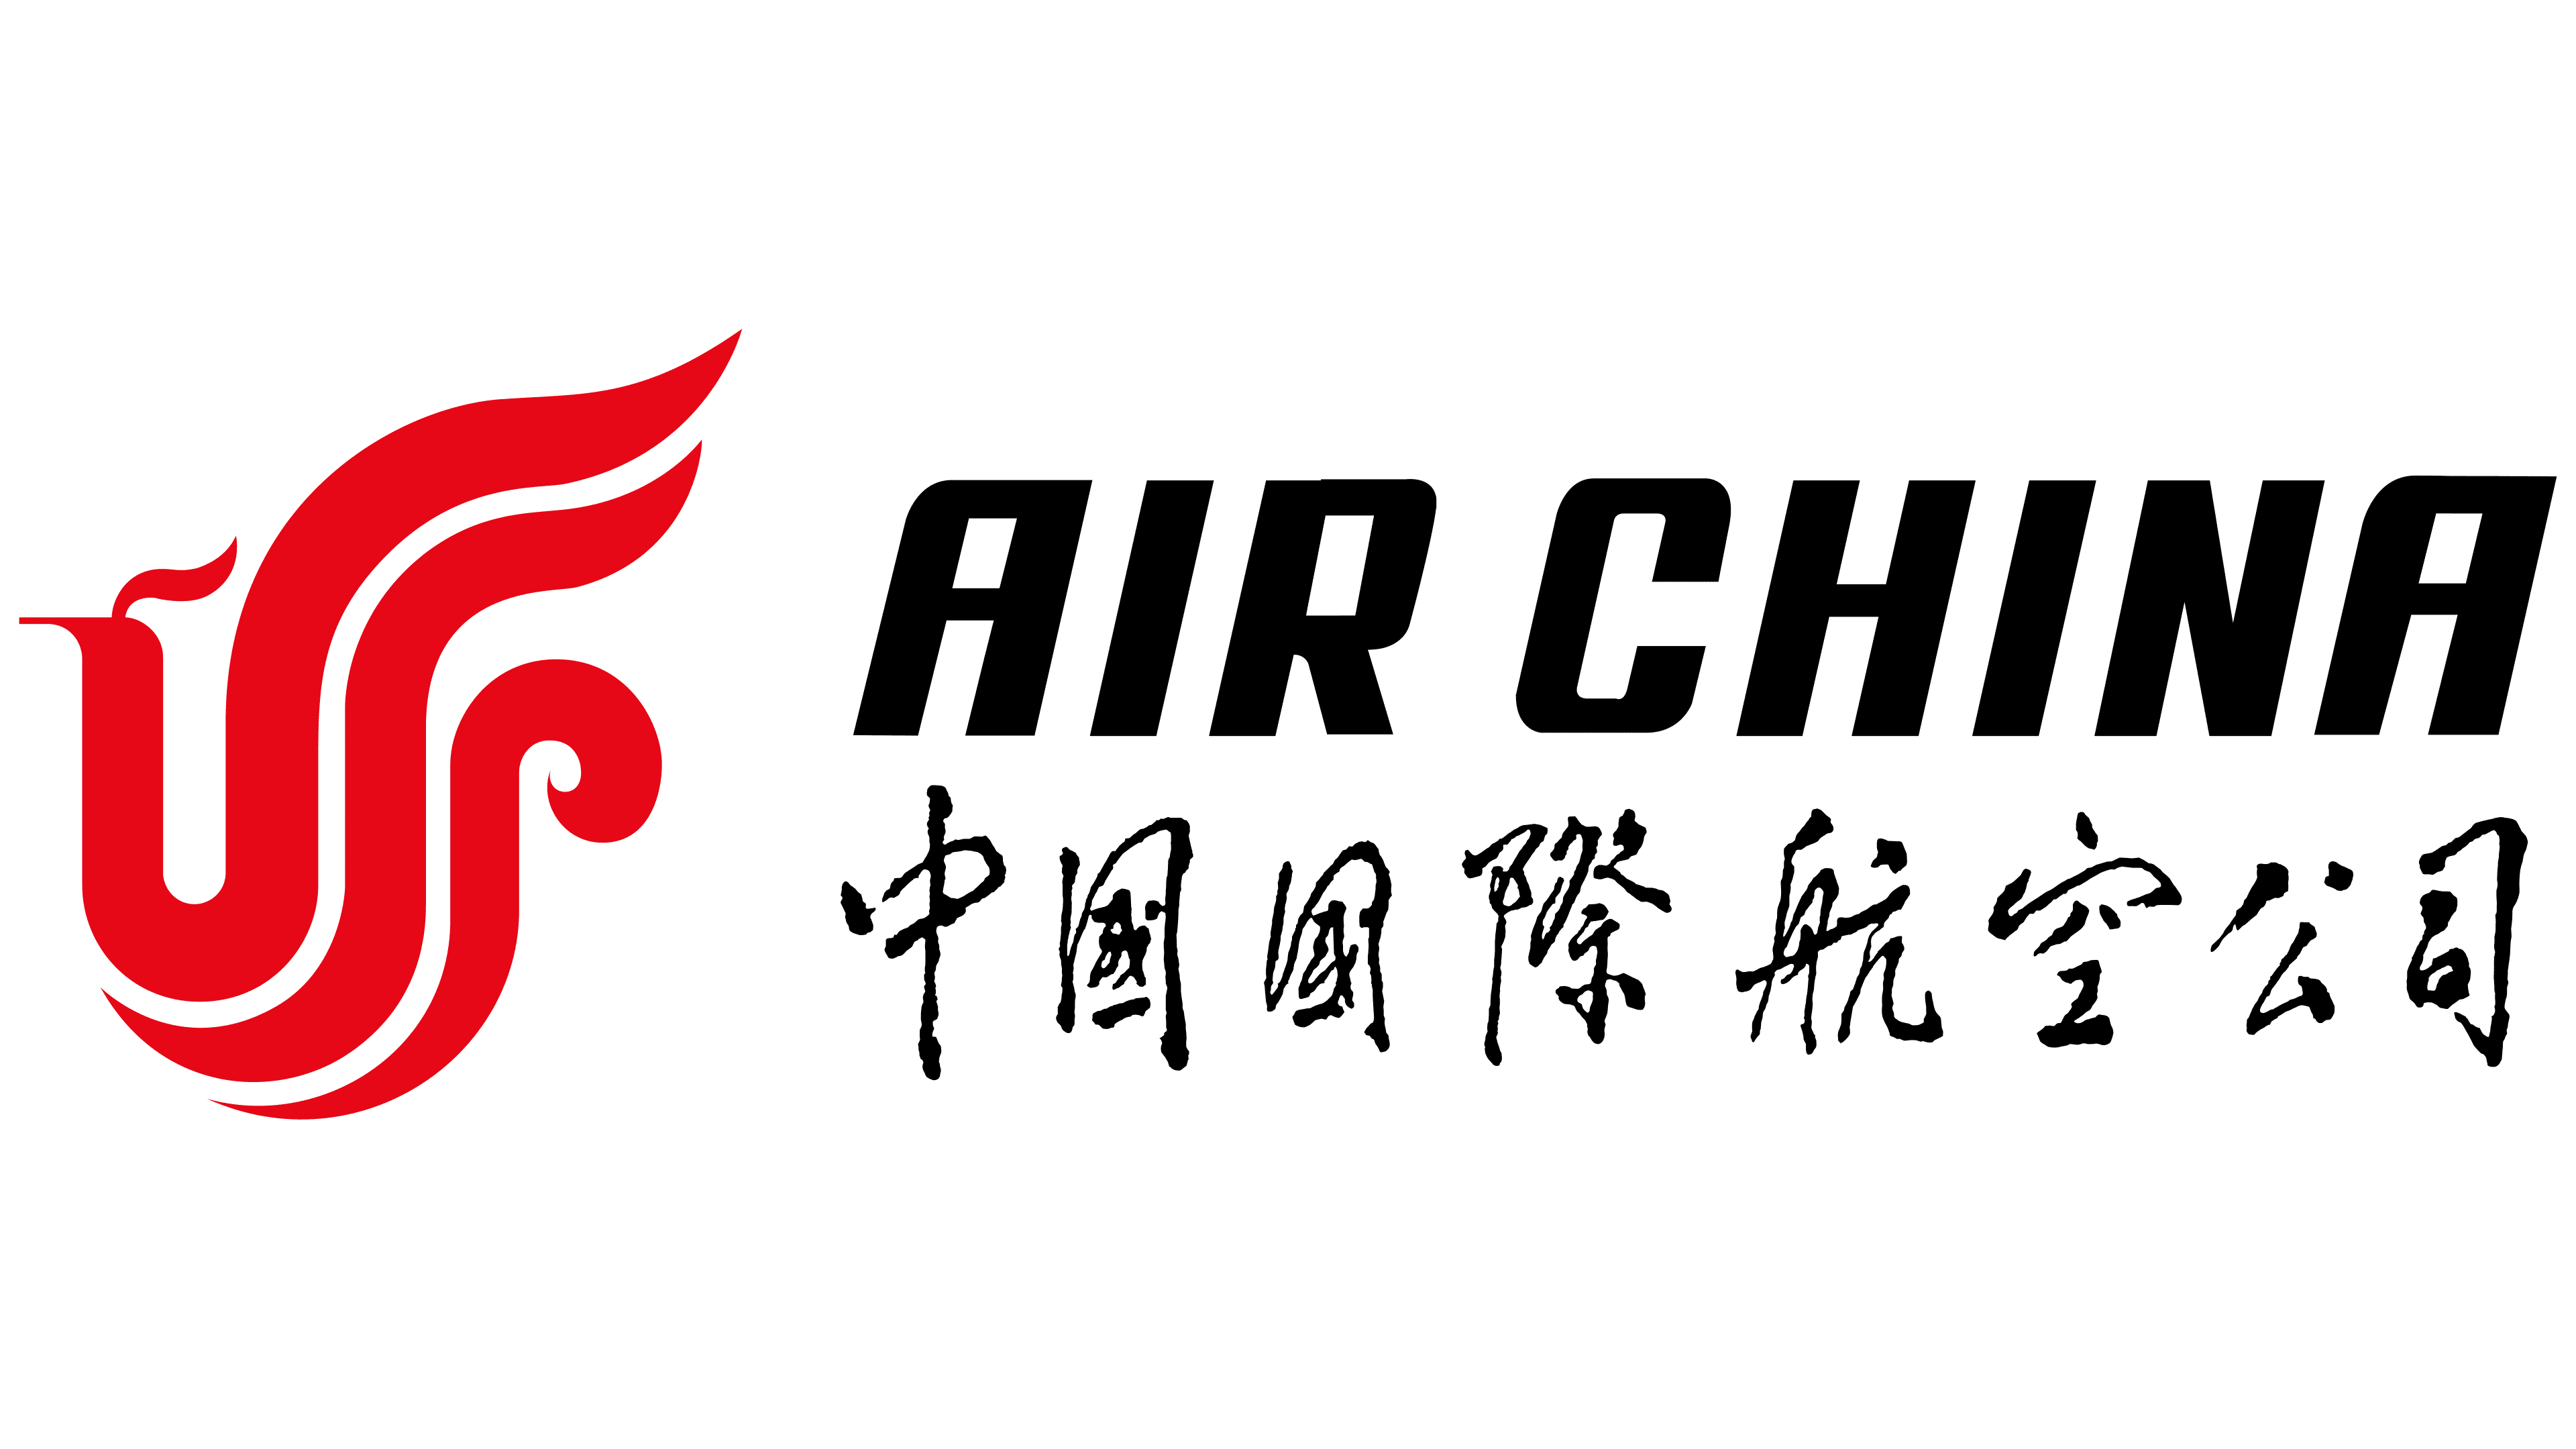 Air France Logo and symbol, meaning, history, PNG, brand